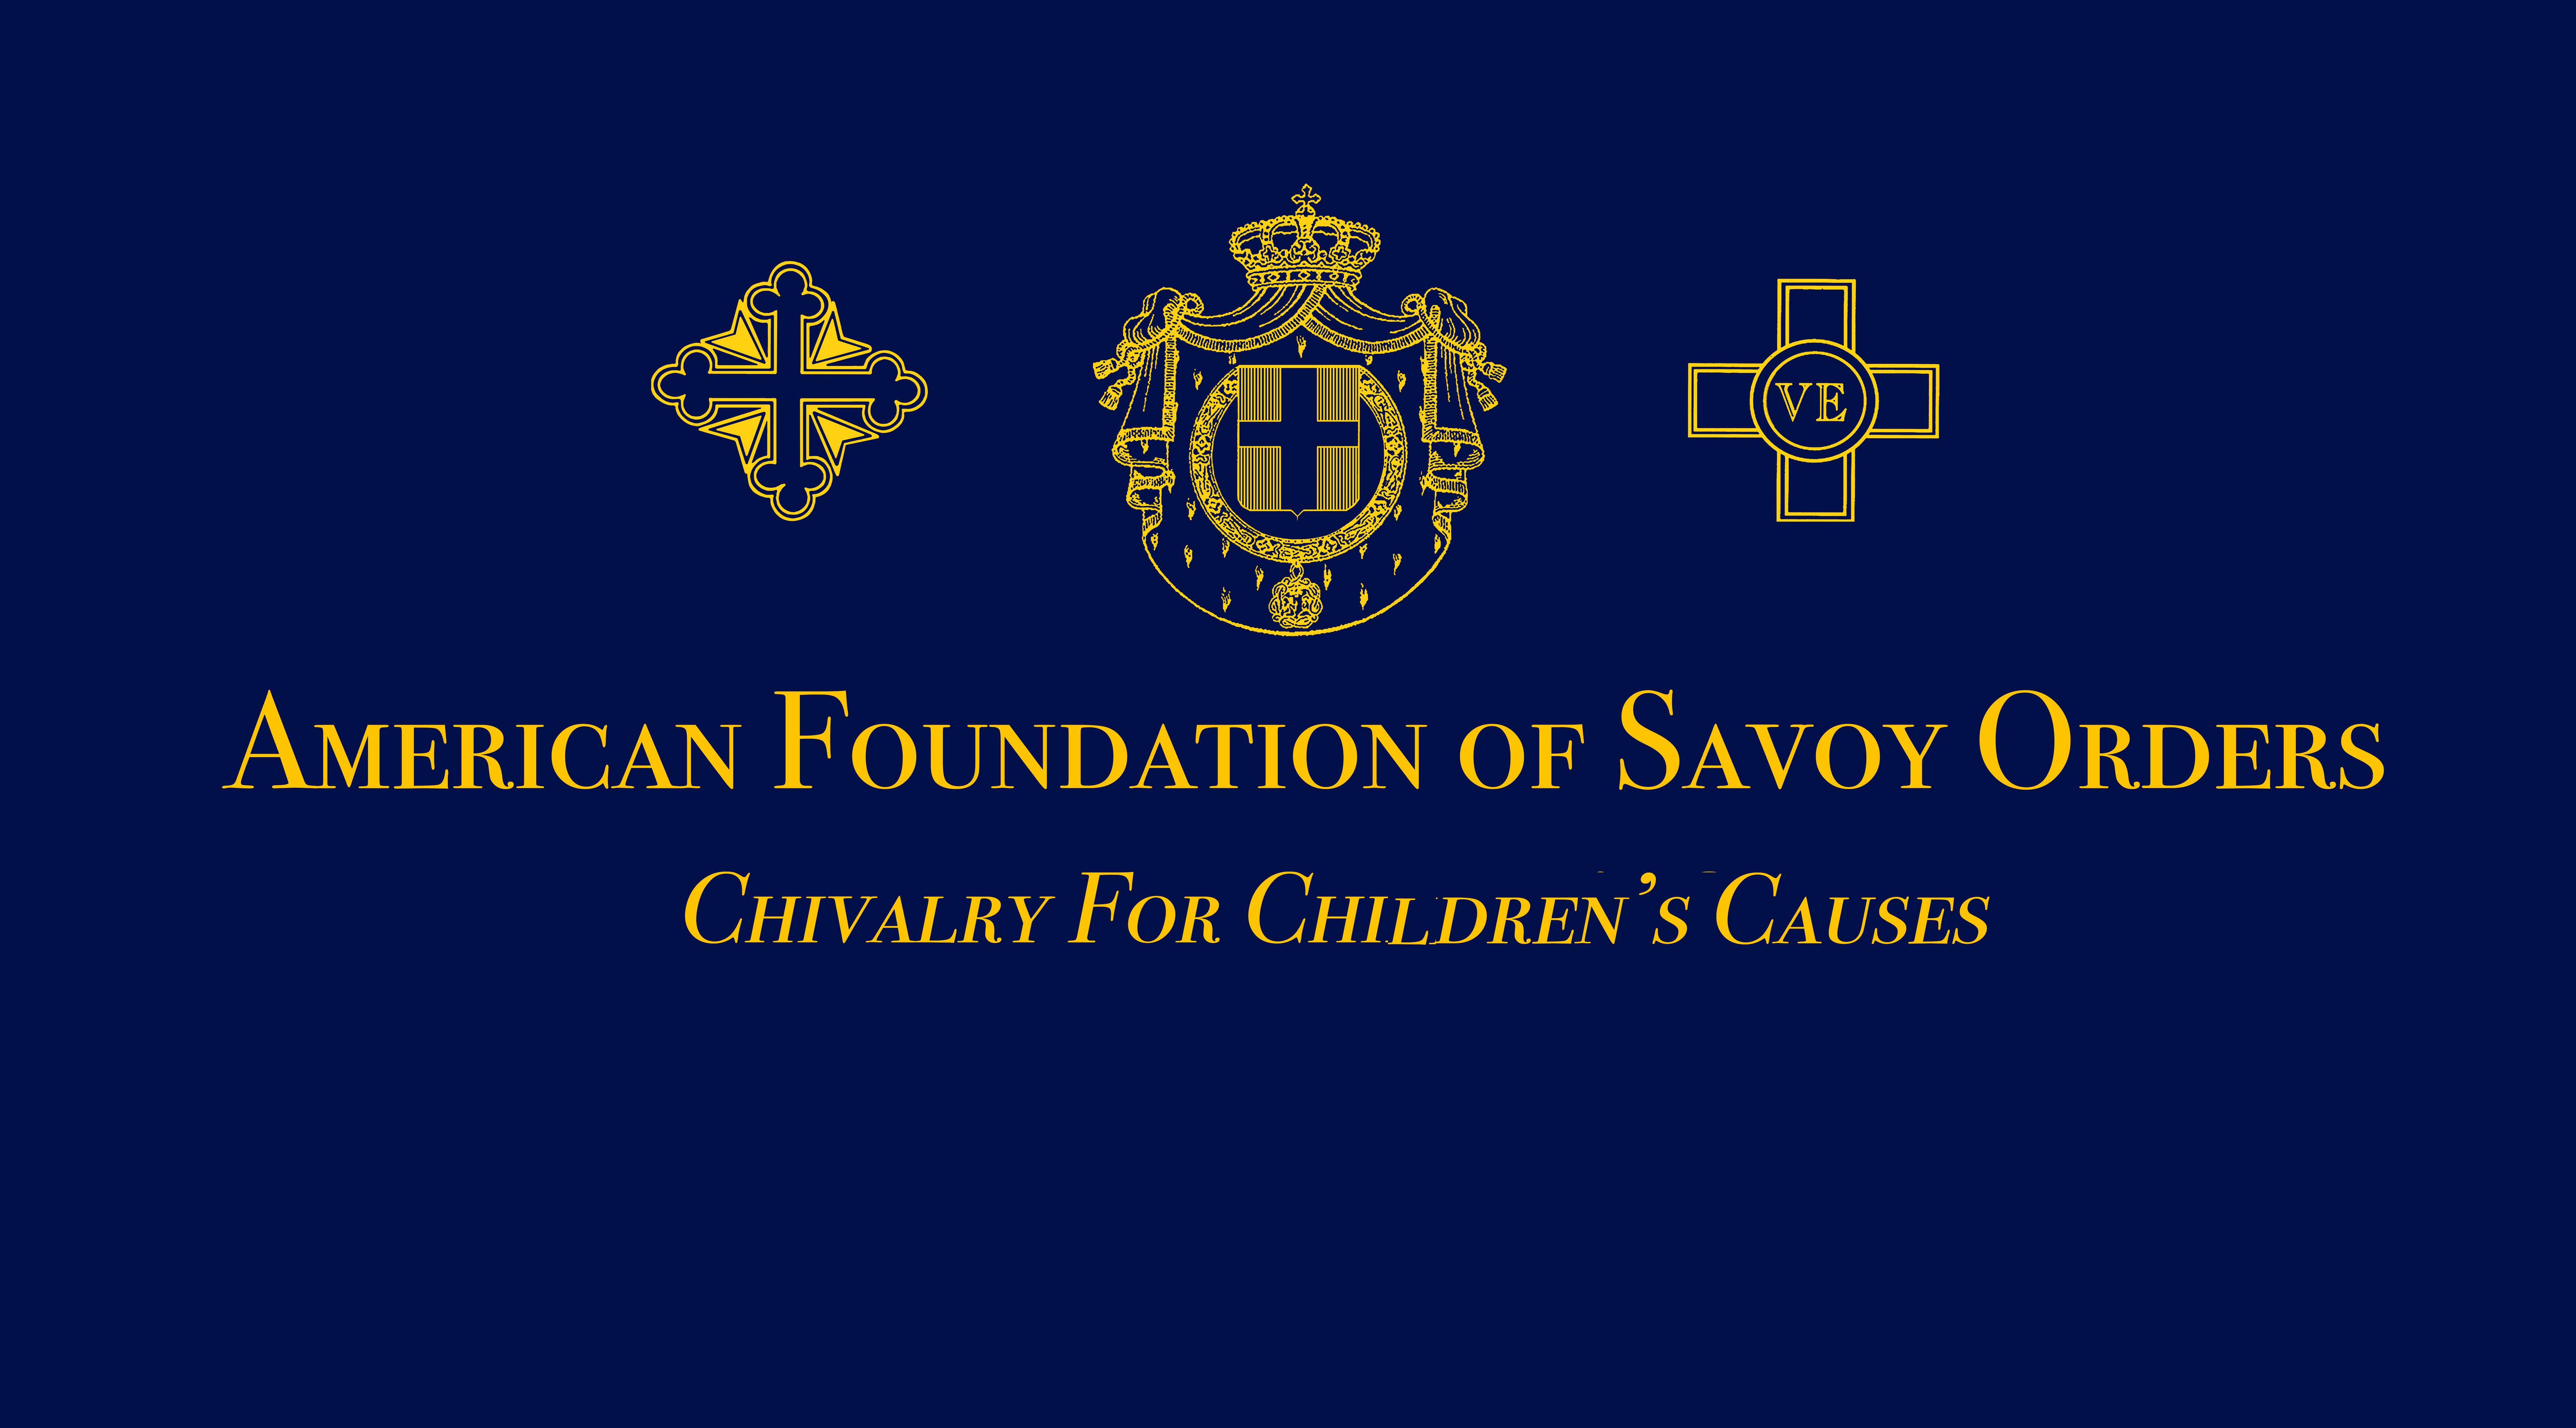 AMERICAN FOUNDATION OF SAVOY ORDERS